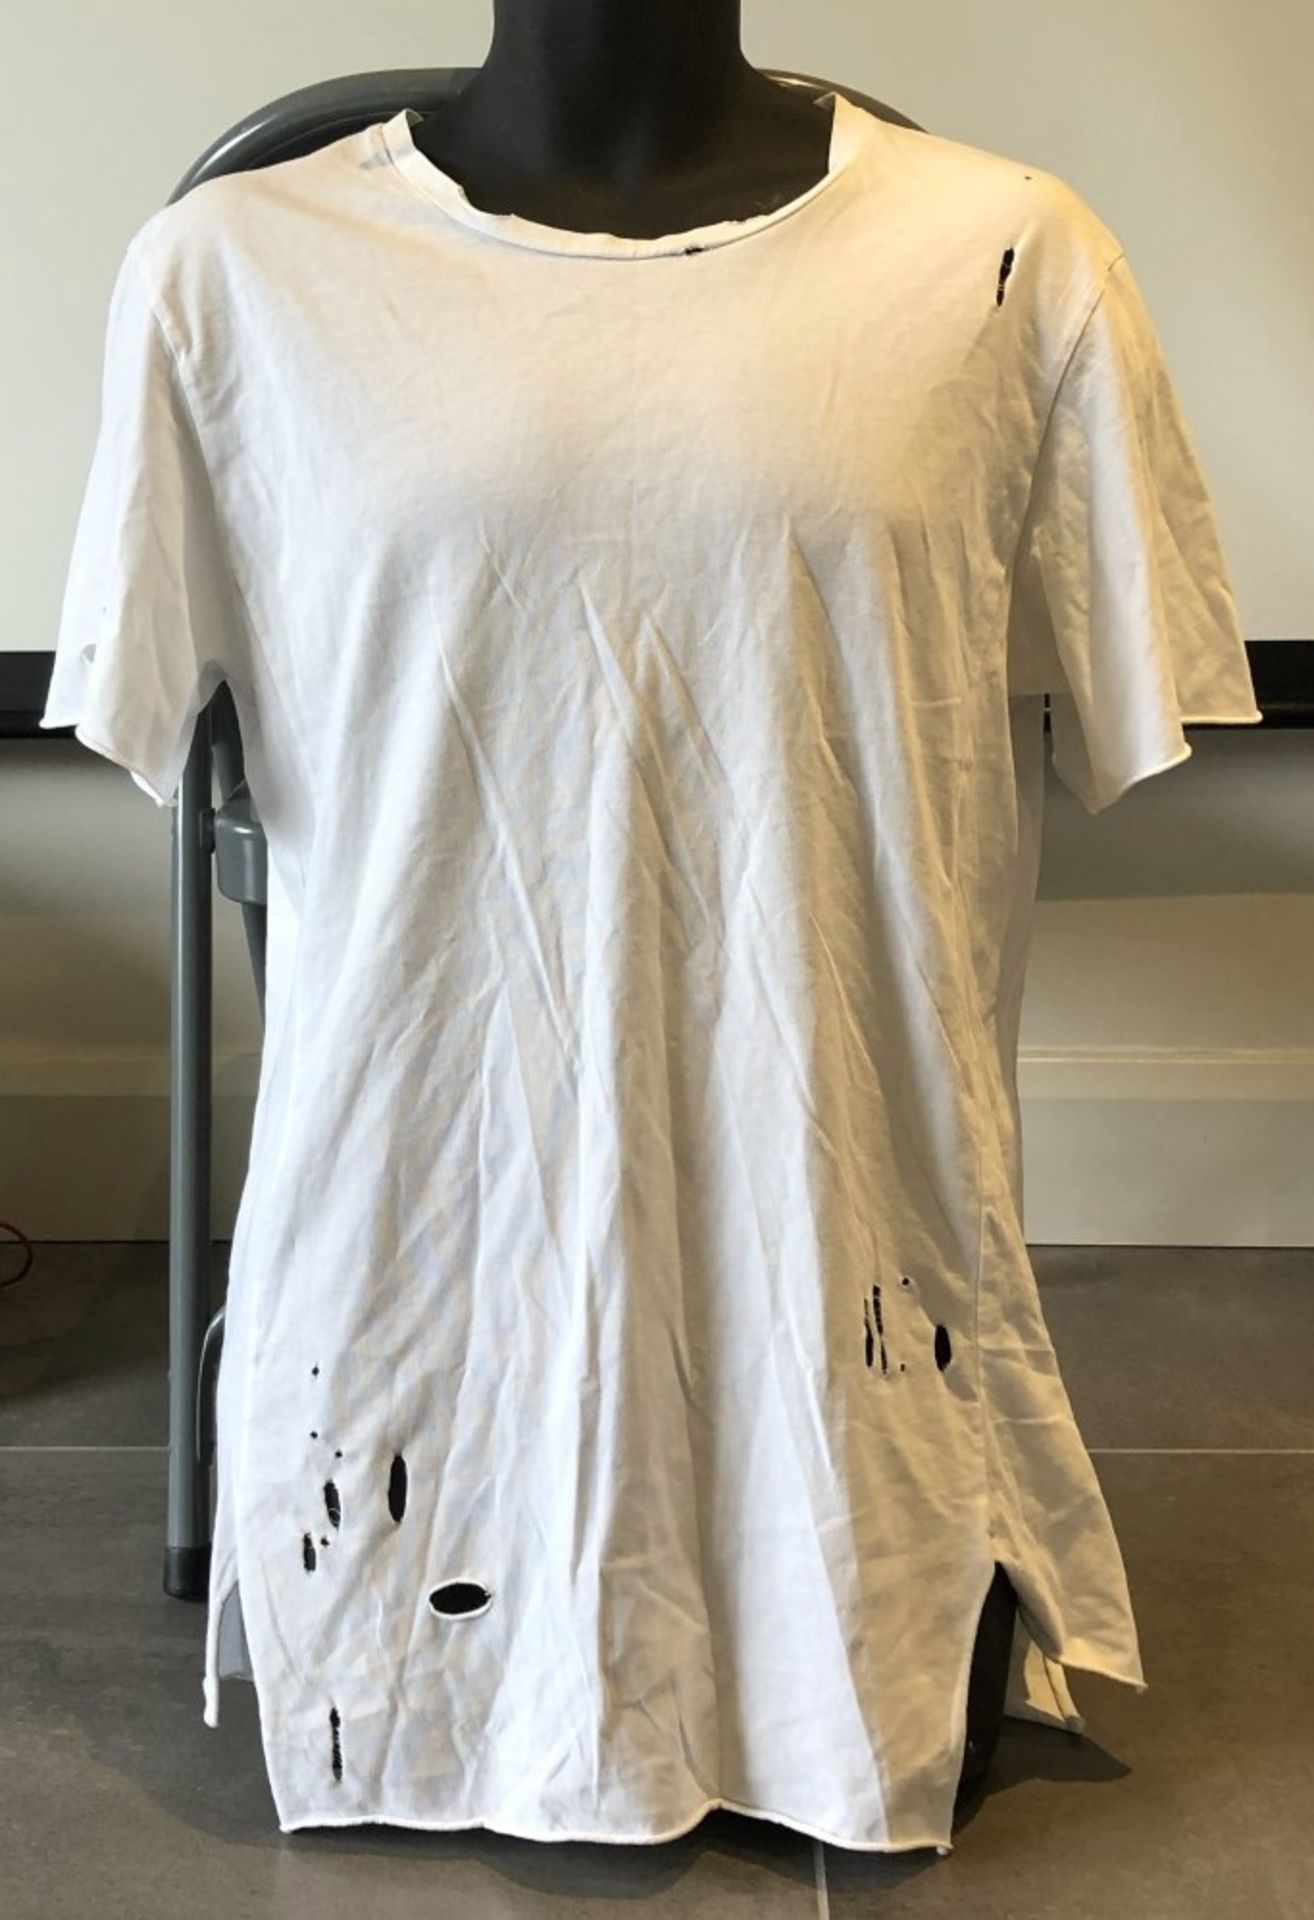 1 x Men's Genuine Designer Distressed T-Shirt In White - Preowned - Ref: JS161 - NO VAT ON THE